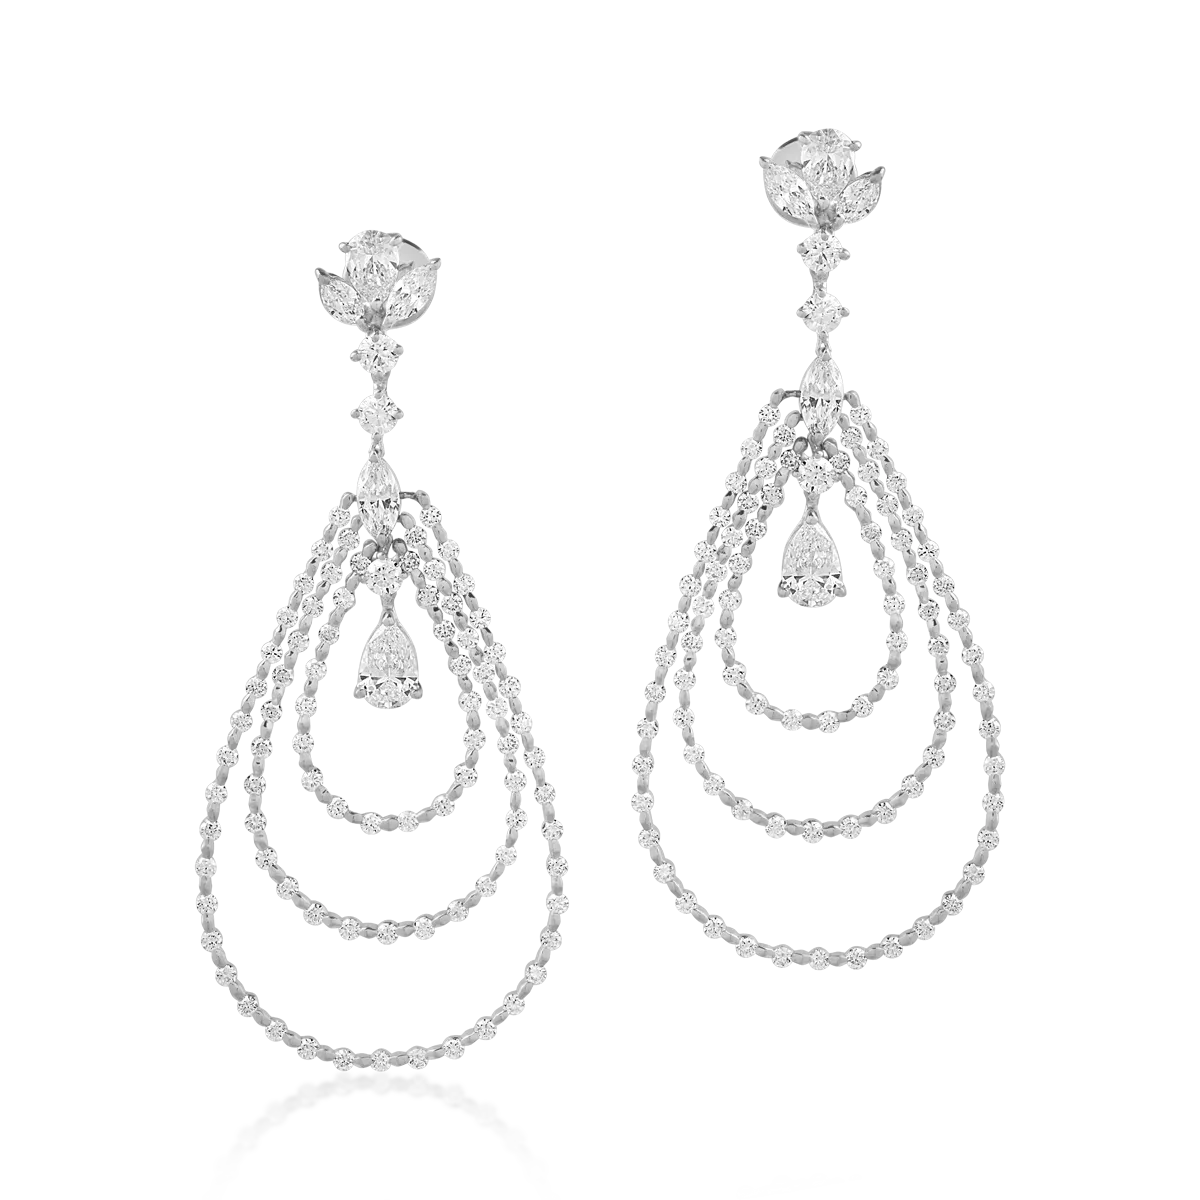 18K white gold earrings with 4.56ct diamonds